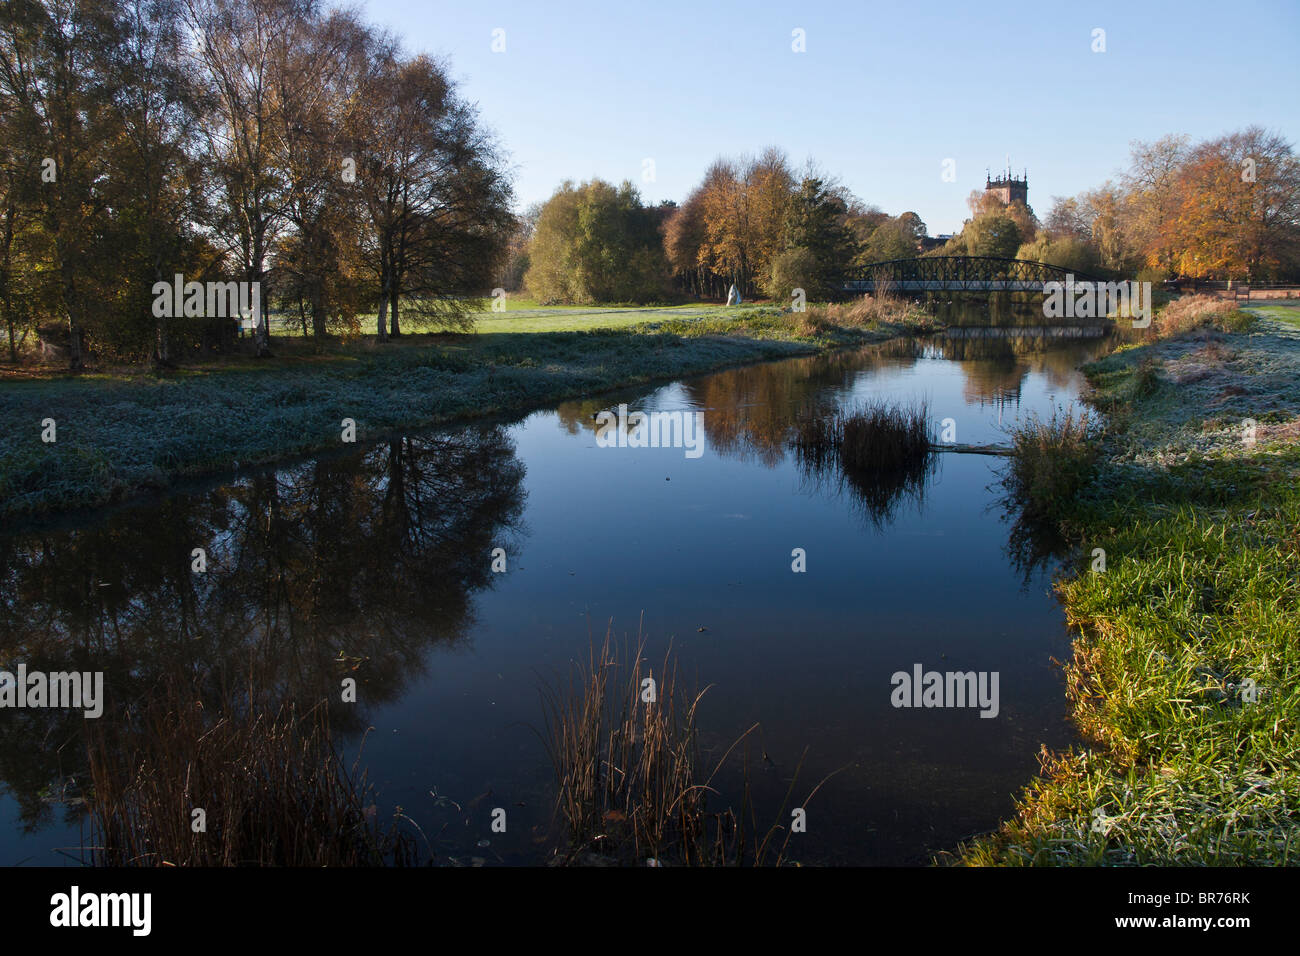 Andresey Island, Andresey Bridge and St Modwen's church, River Trent ...